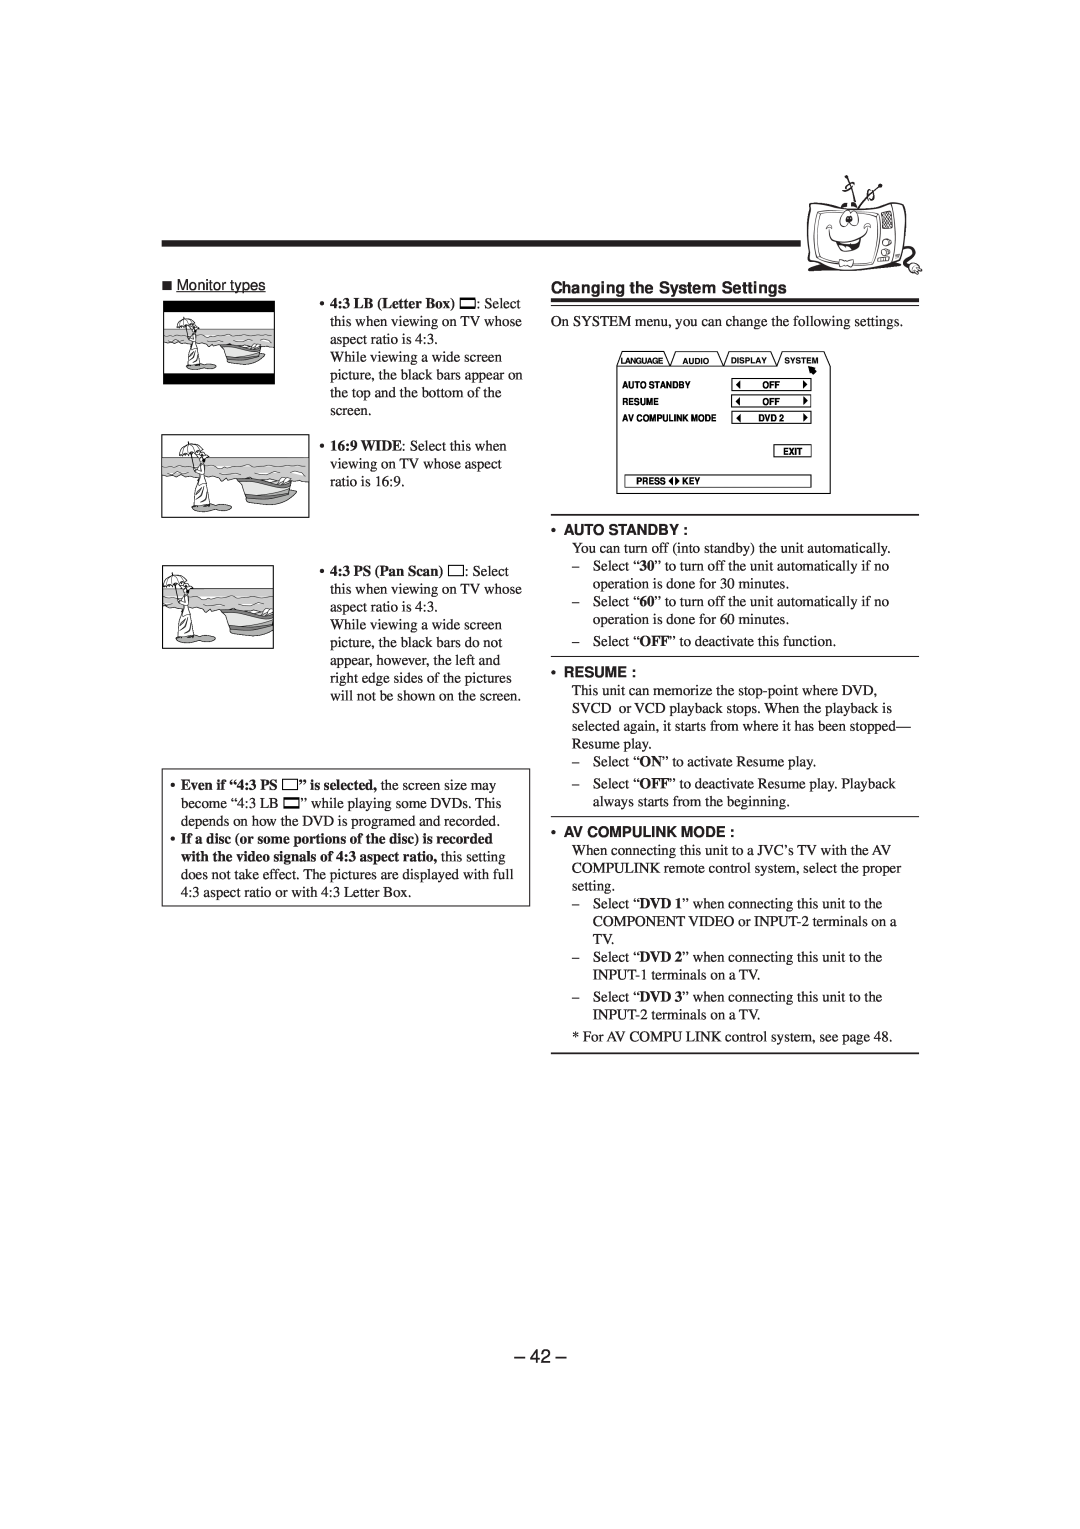 JVC GVT0057-016A, SP-DSC99TN manual Changing the System Settings, Auto Standby, Resume, Av Compulink Mode 